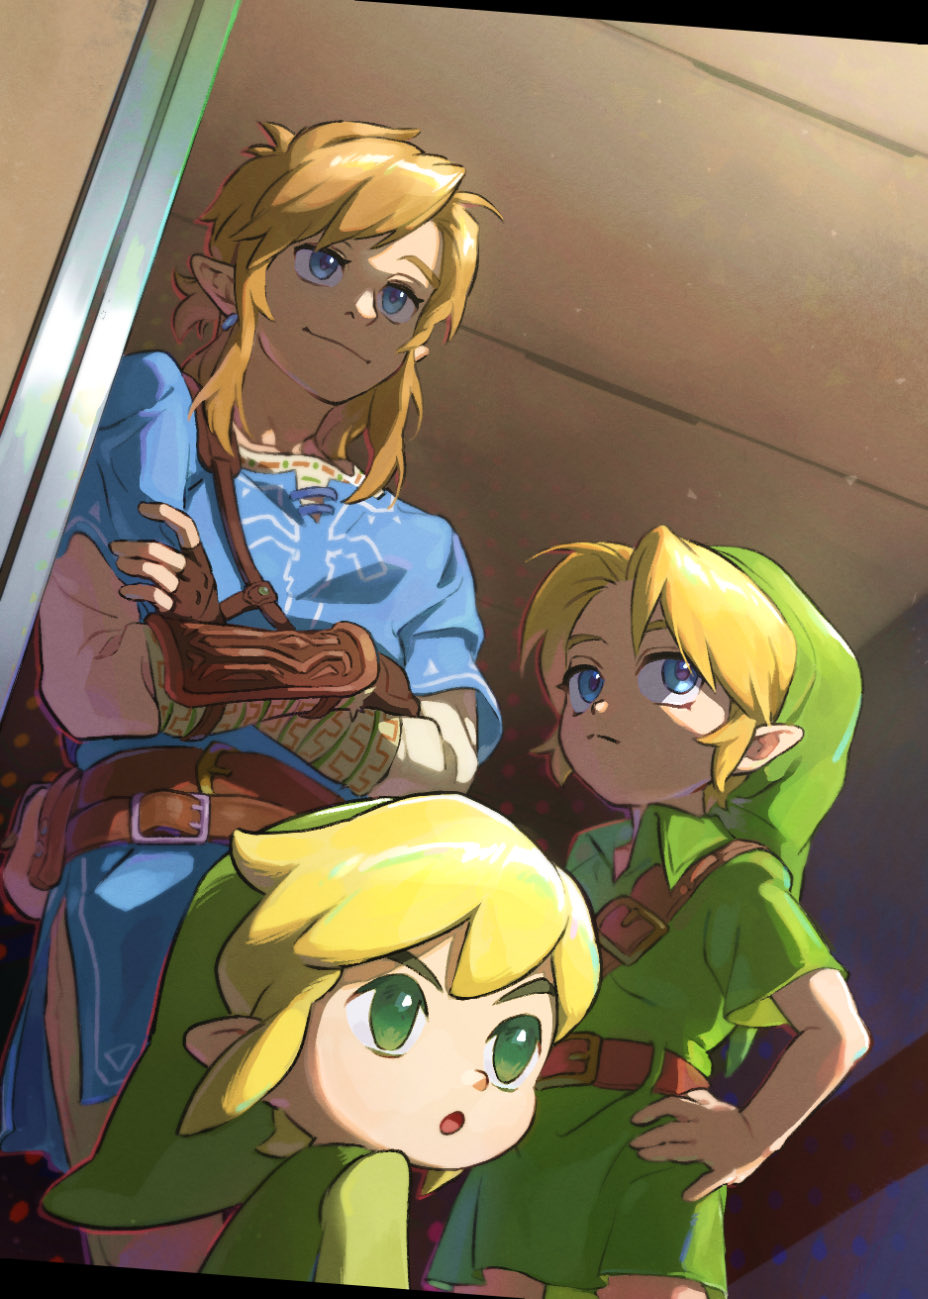 3boys blonde_hair blue_eyes blue_tunic child crossed_arms eunjuragi green_eyes hand_on_hip highres link looking_at_viewer male_focus multiple_boys orange_hair pointy_ears the_legend_of_zelda the_legend_of_zelda:_a_link_between_worlds the_legend_of_zelda:_breath_of_the_wild the_legend_of_zelda:_ocarina_of_time toon_link young_link